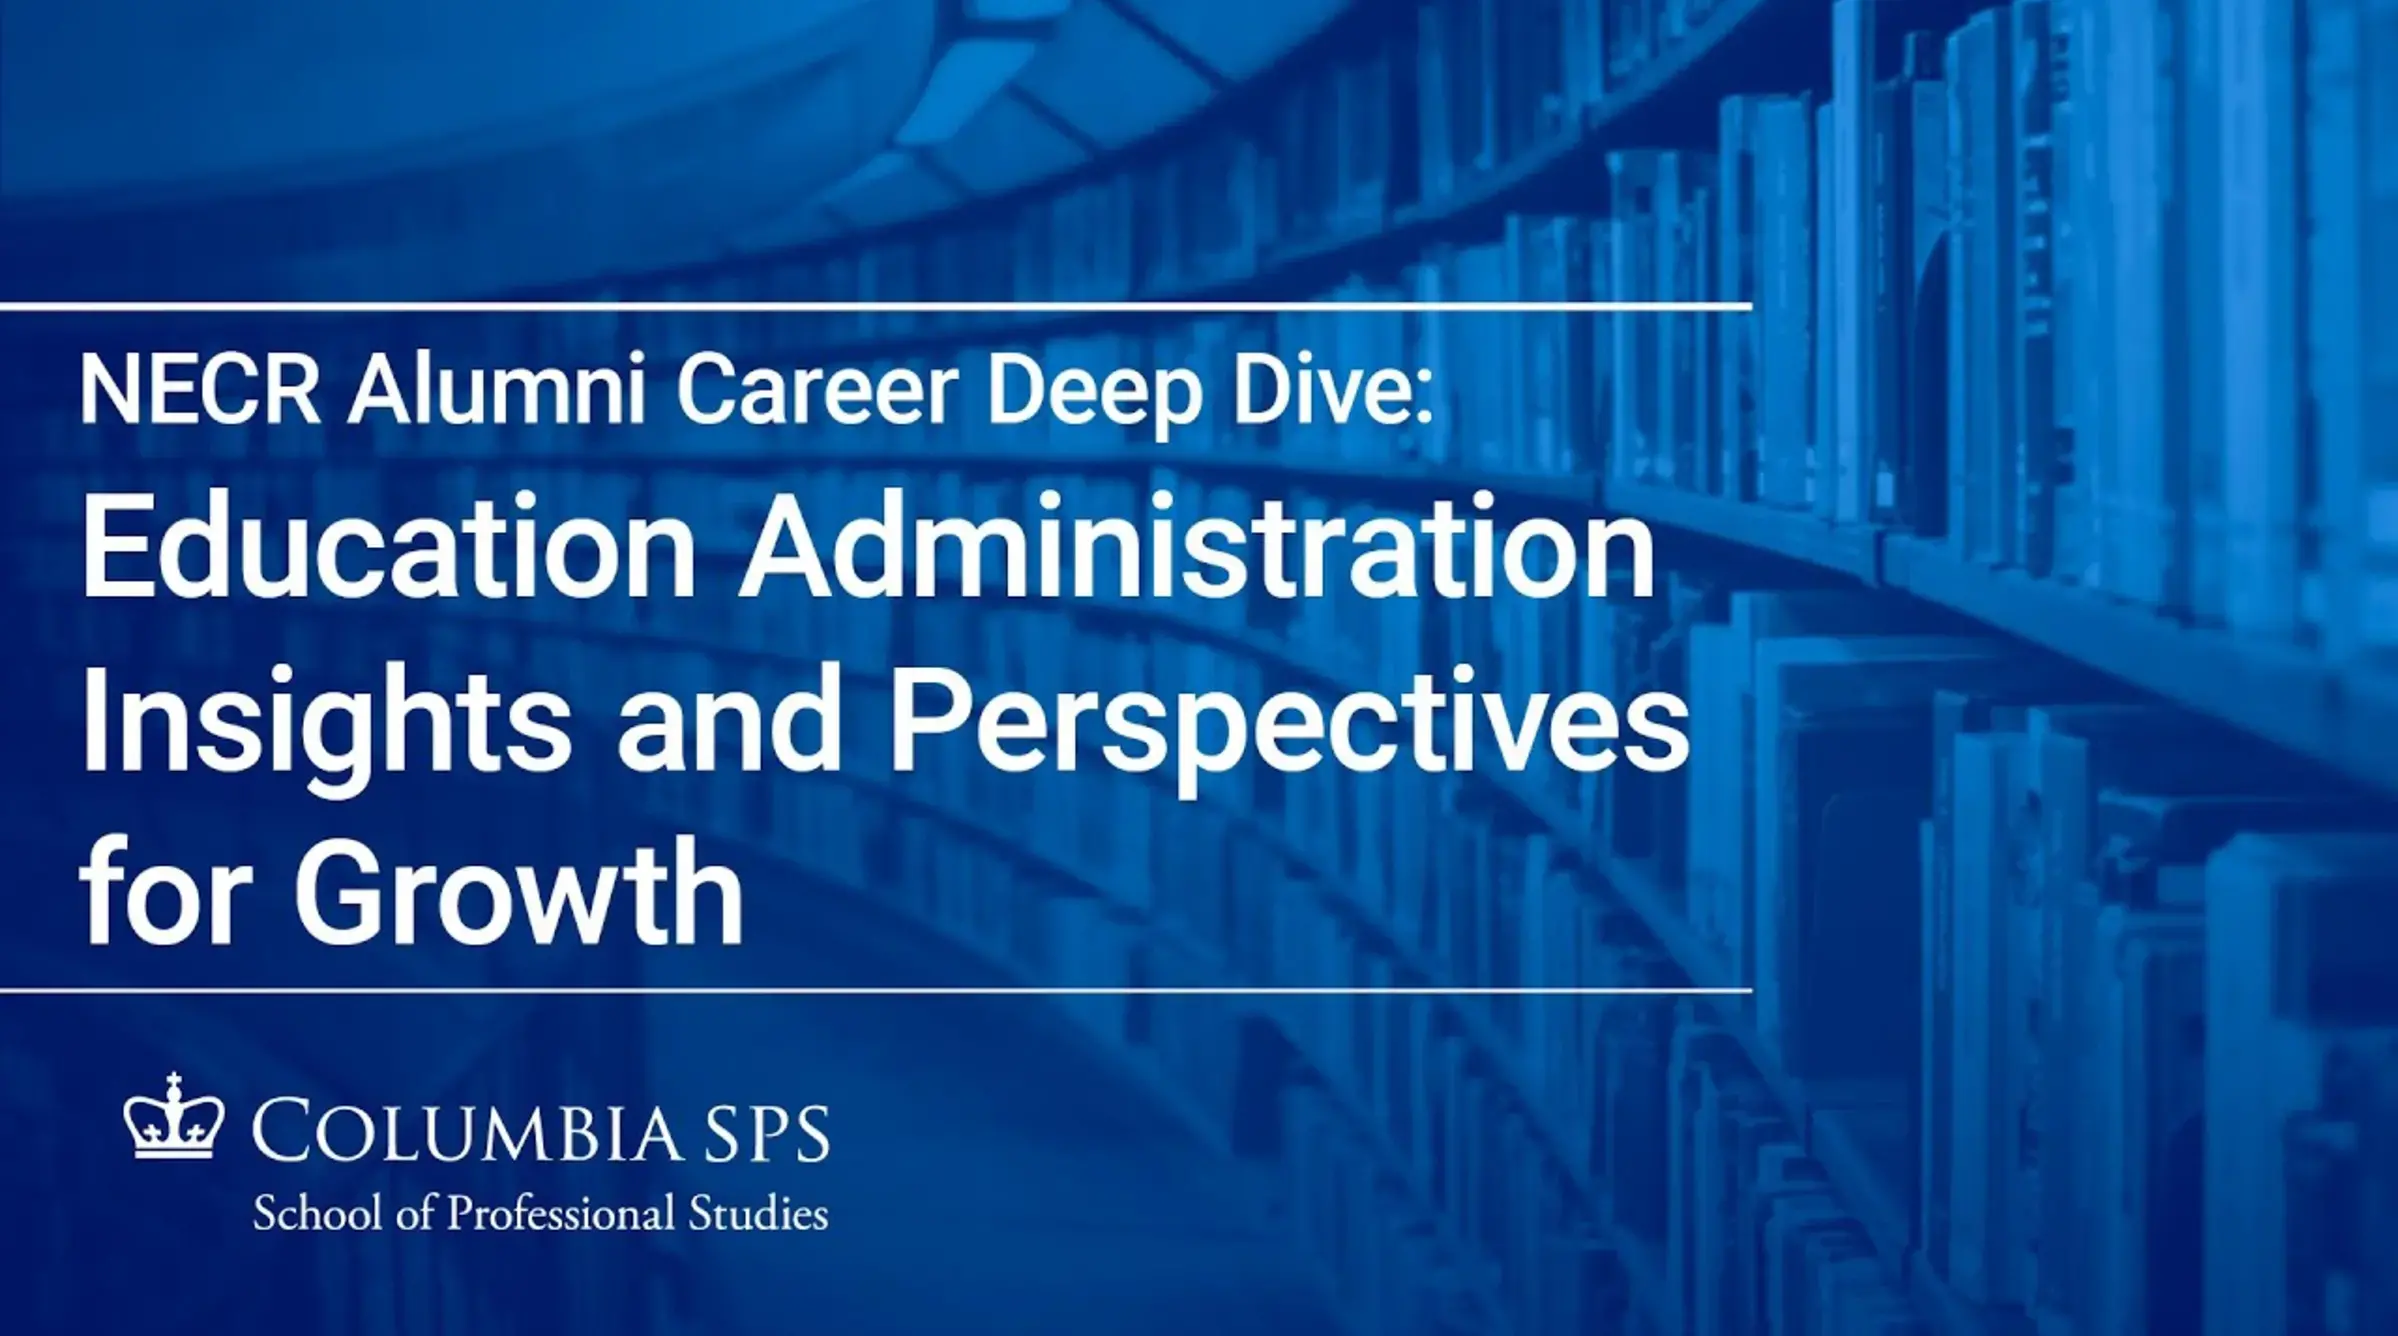 NECR Alumni Career Deep Dive: Education Administration Insights and Perspectives for Growth